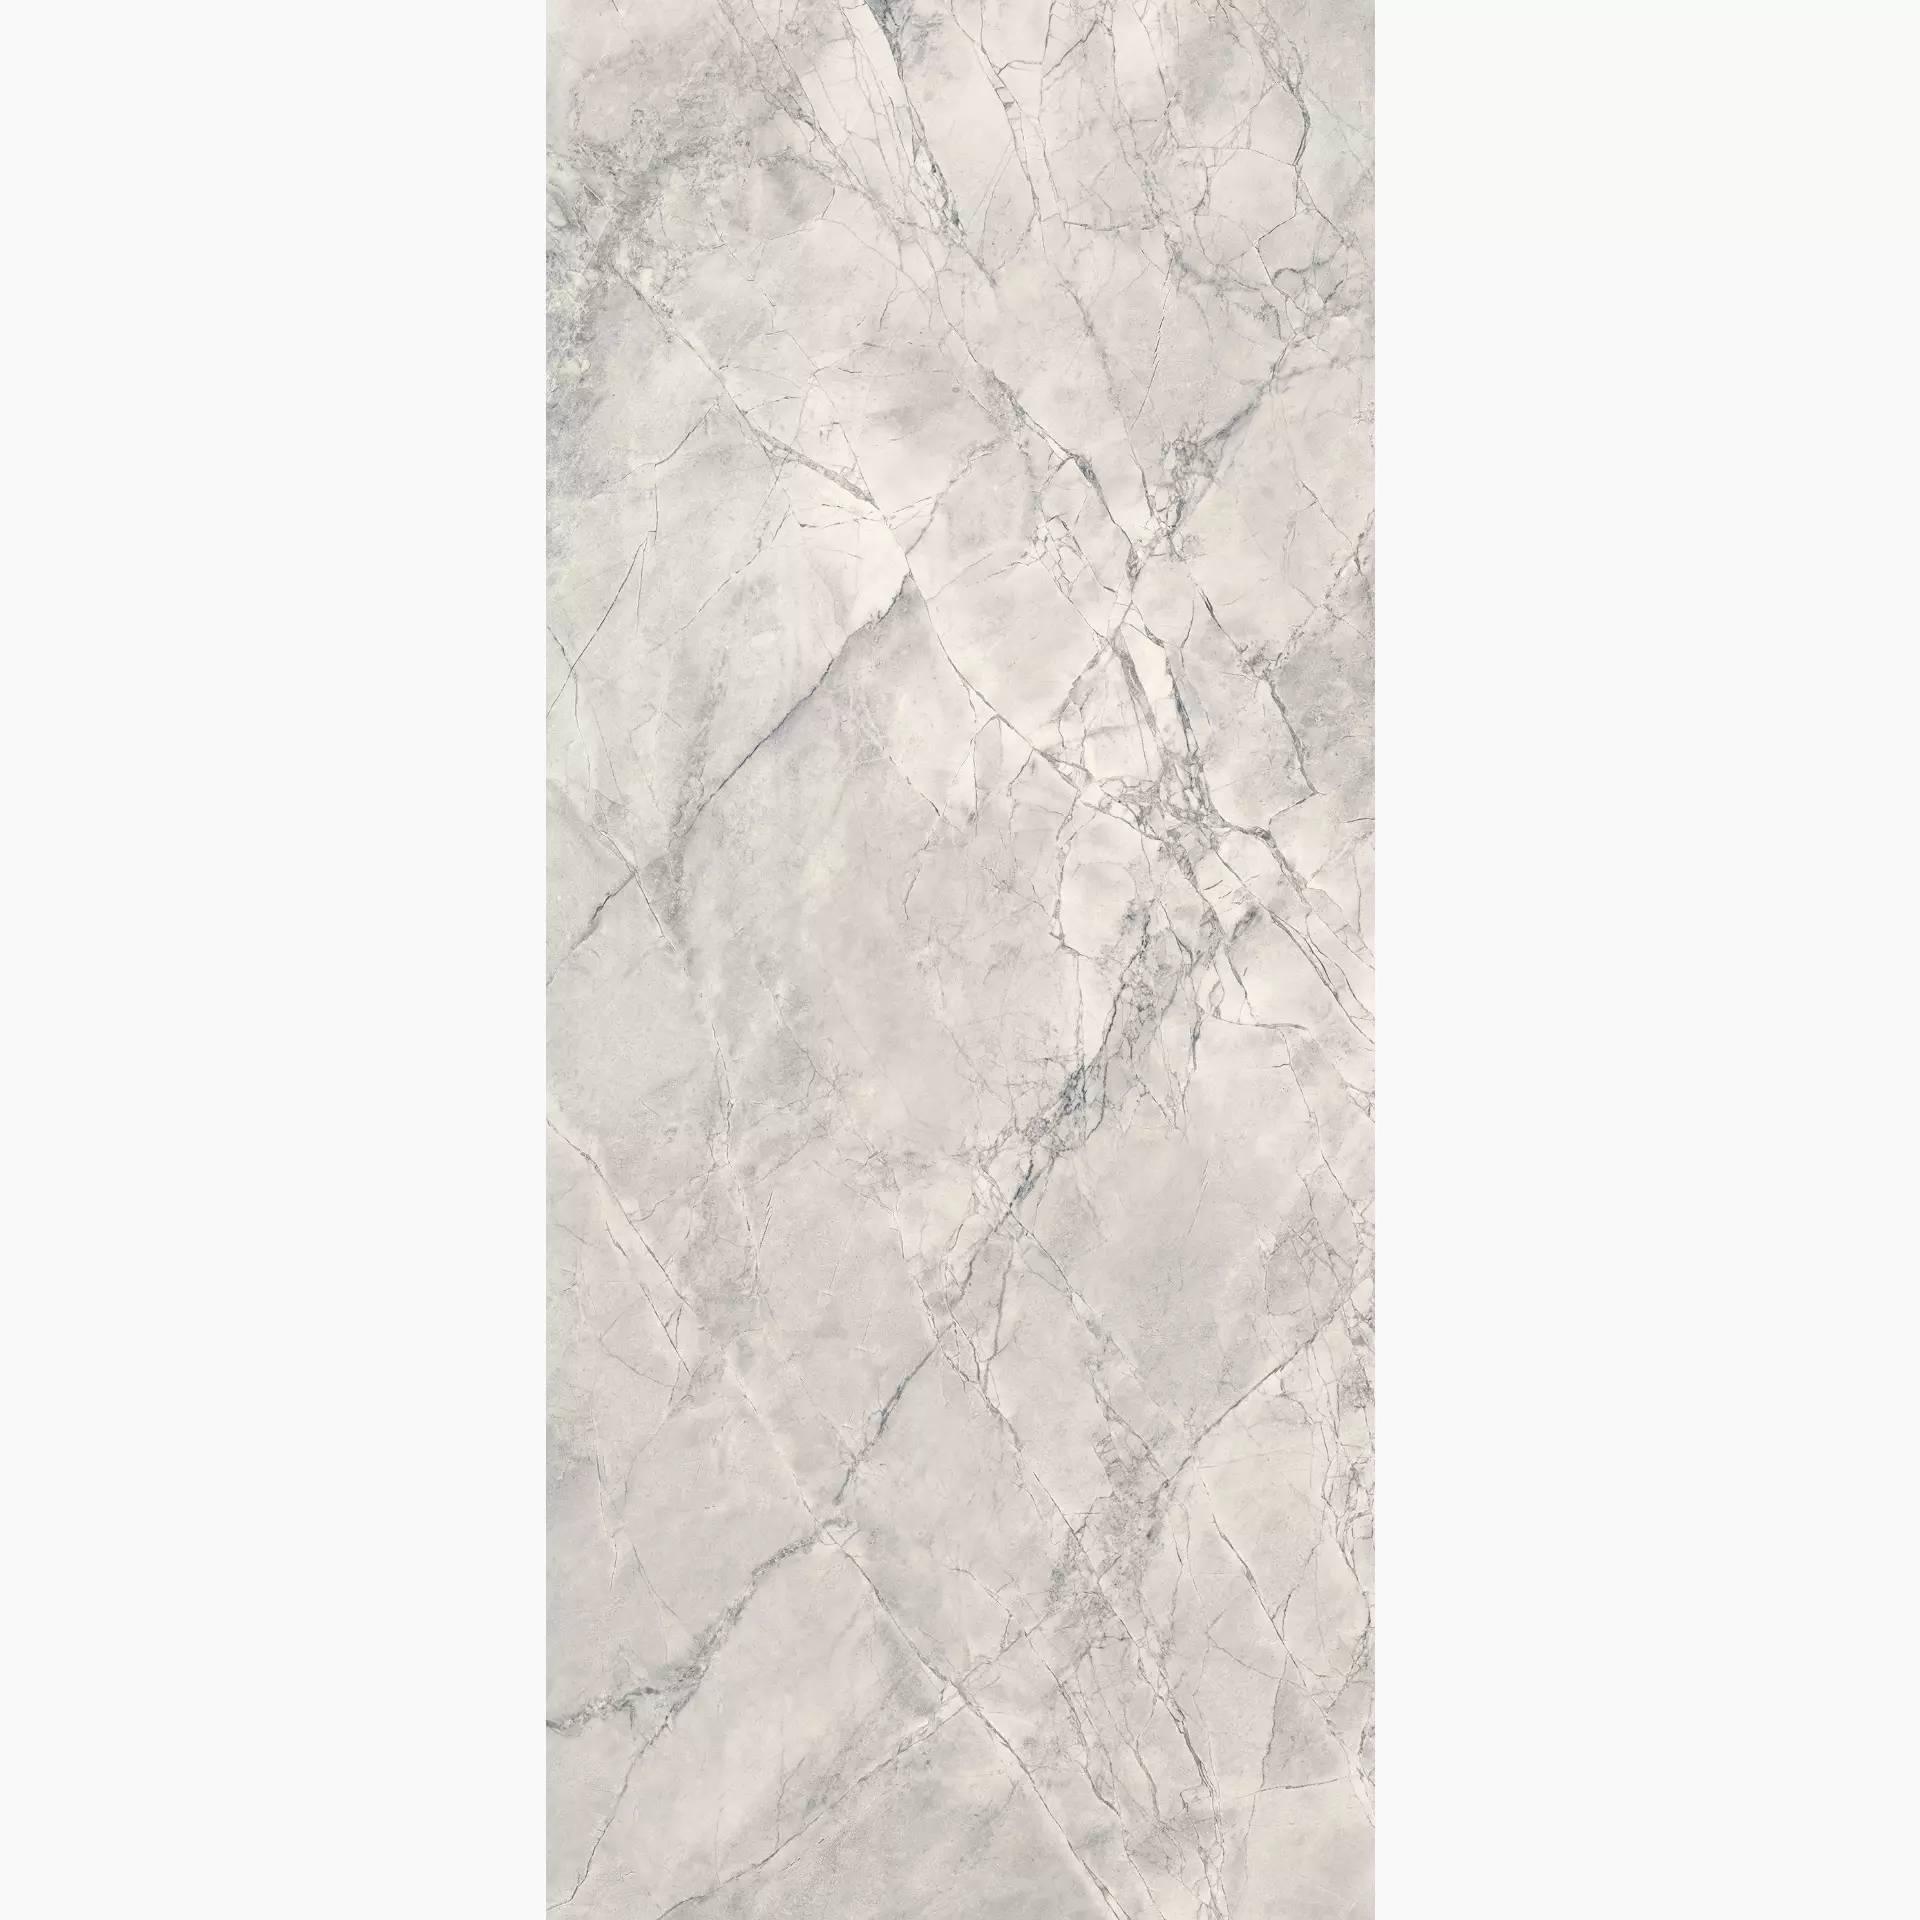 Fondovalle Infinito 2.0 Super White Glossy INF1747 120x278cm rectified 6,5mm